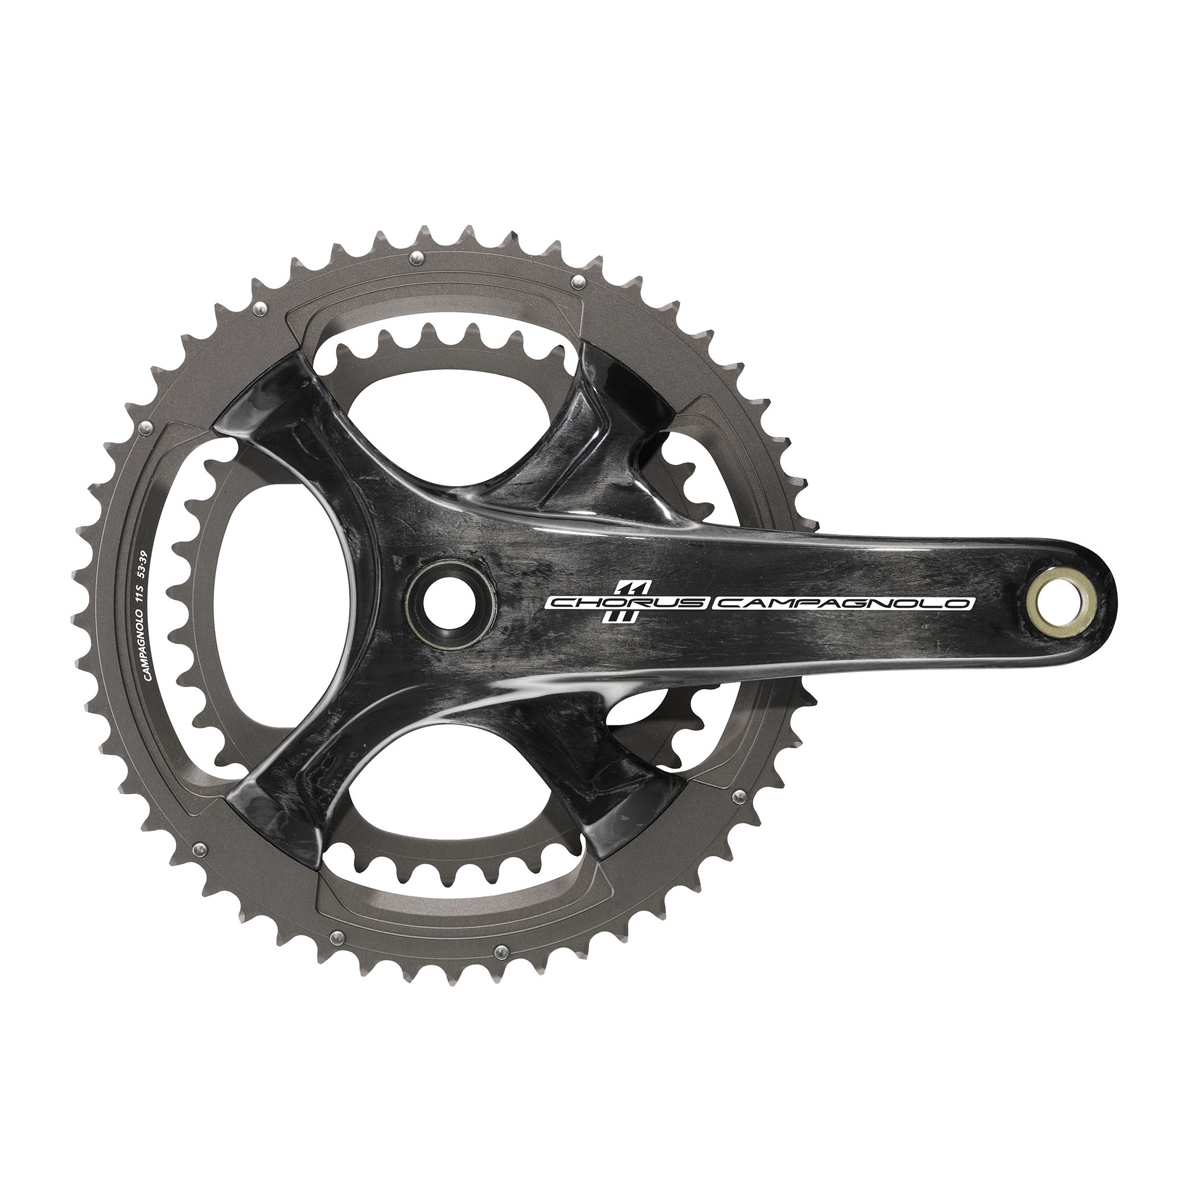 CAMPAGNOLO Chorus Chainset Carbon Ct Ultra Torque 11 Speed 170mm 50-34t (A)